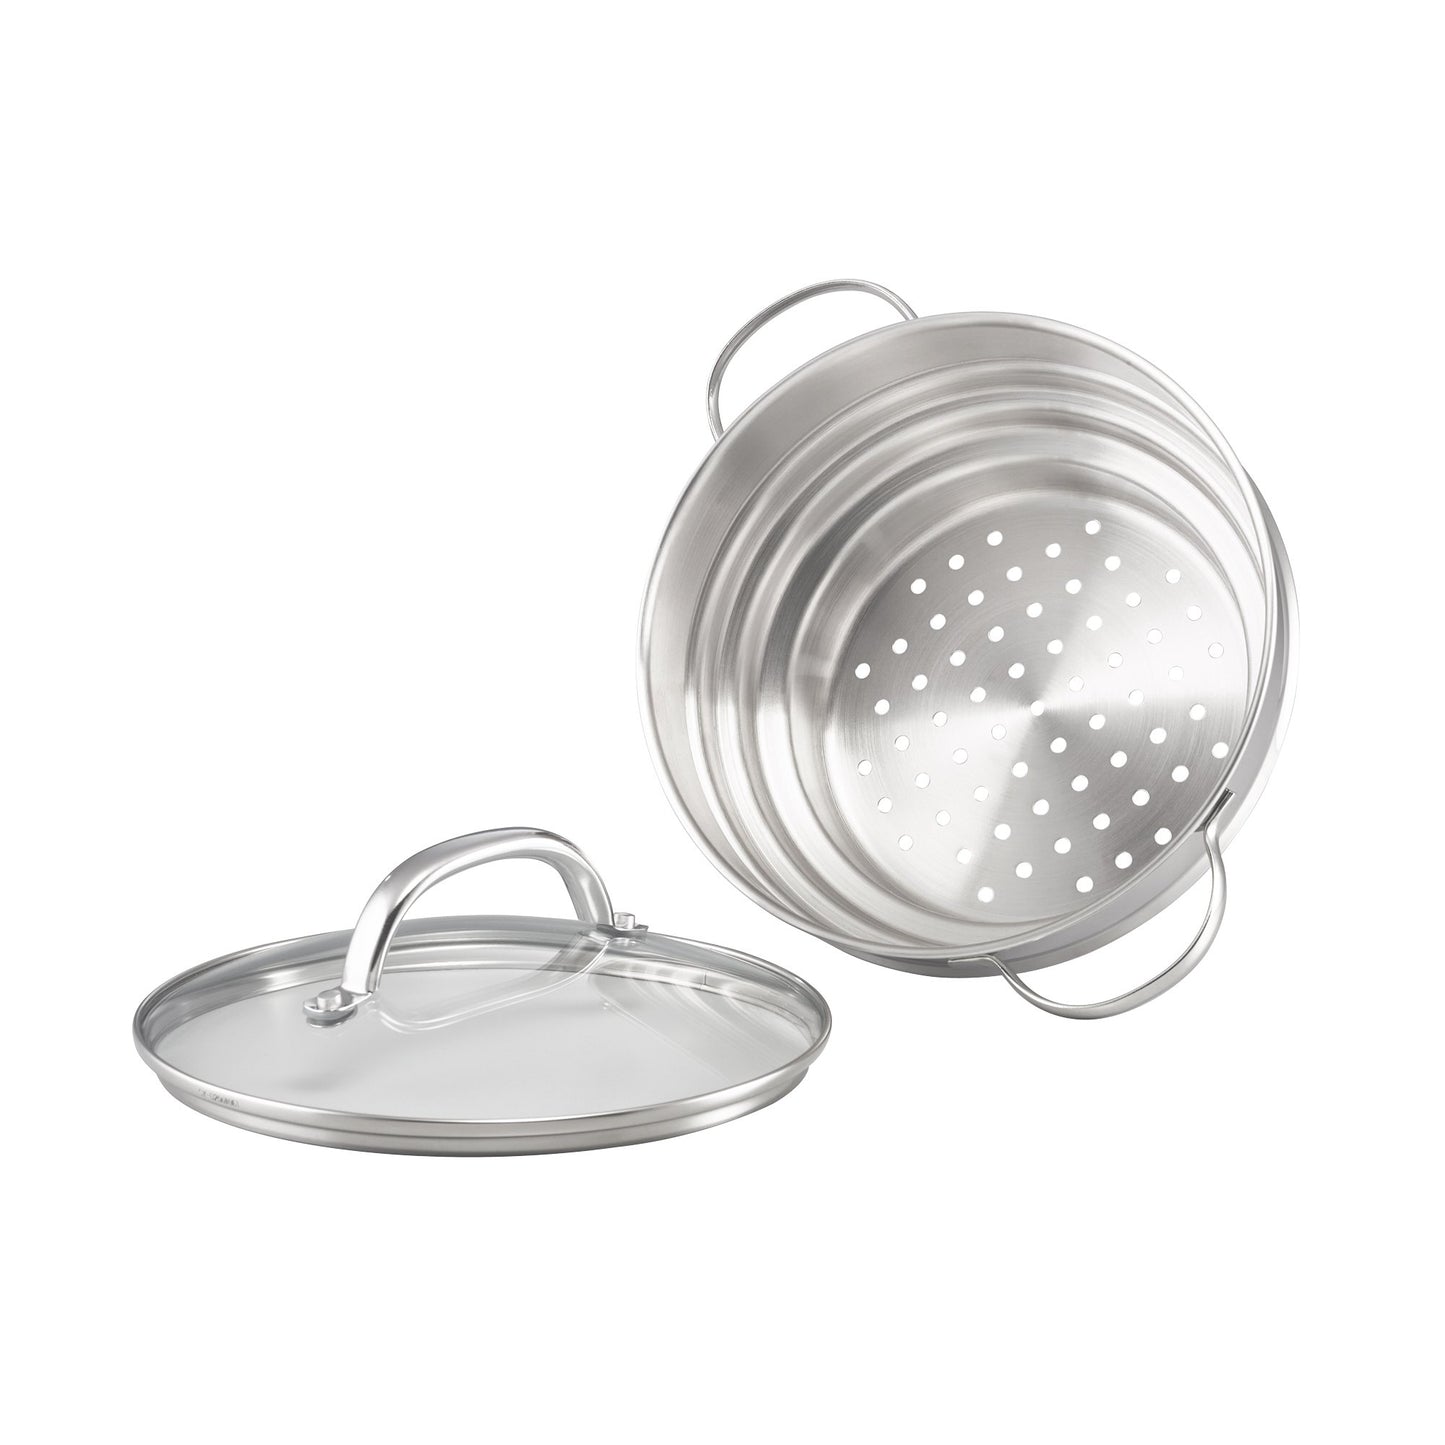 Stainless Steel Multi Steamer With Lid 16/18/20cm